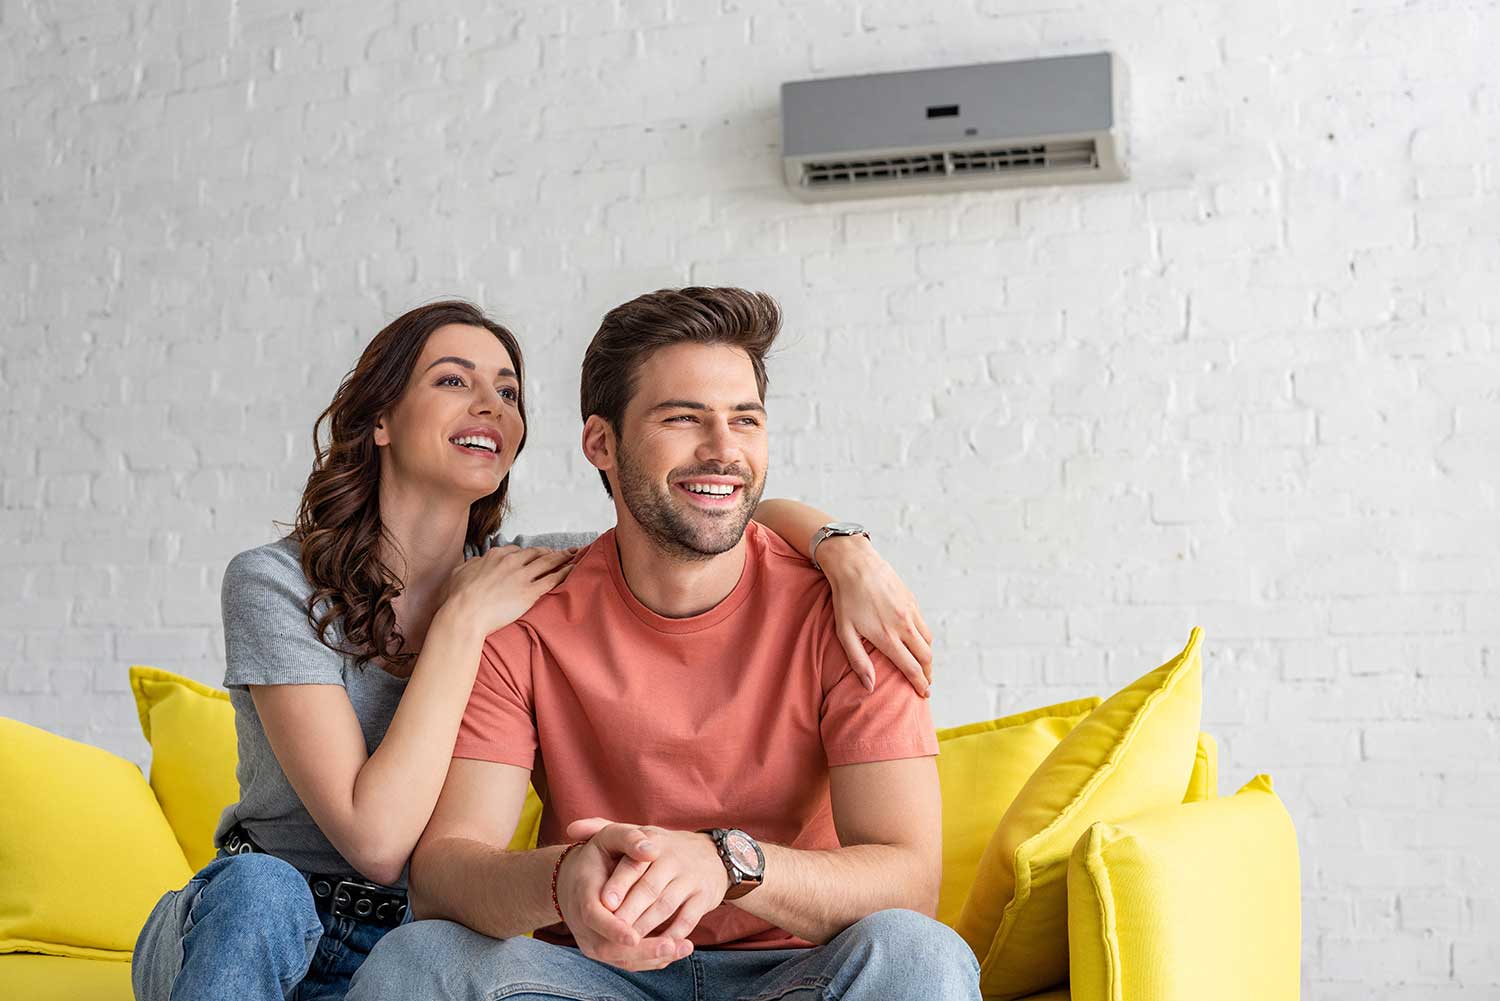 New commercial Heating and Air Conditioning improves morale and productivity